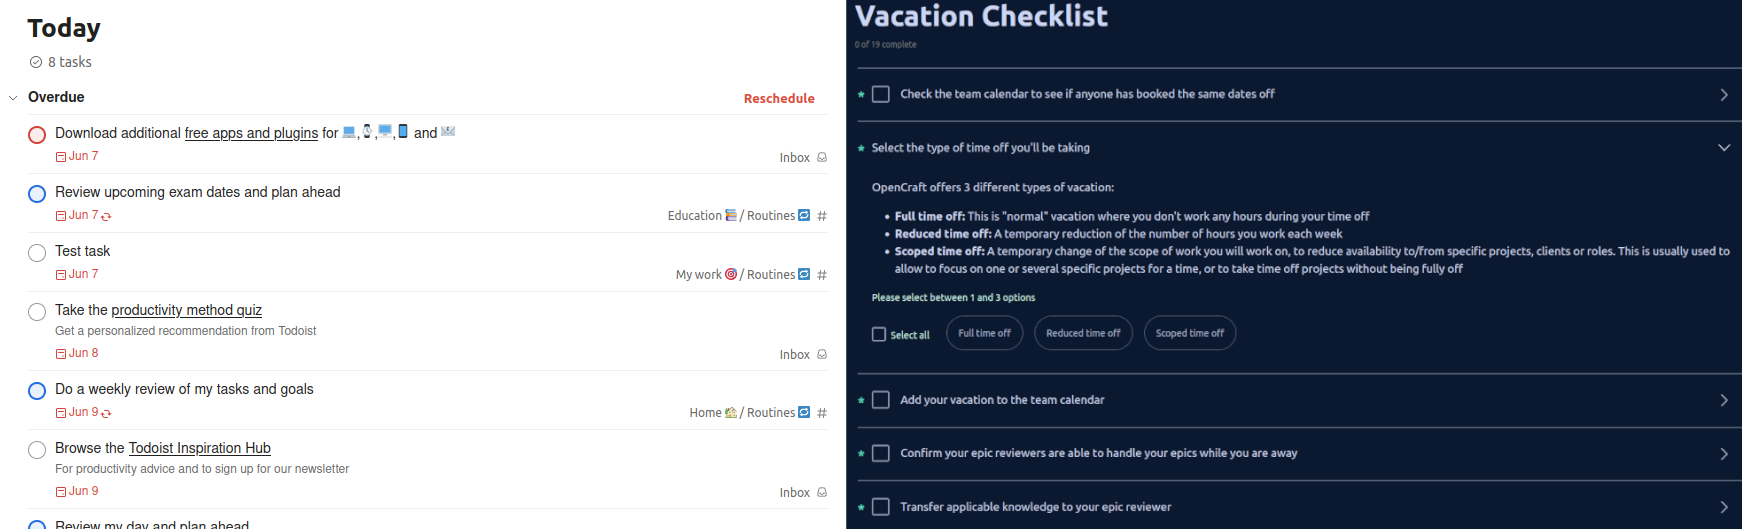 A screenshot comparison of Listaflow and Todoist. On the left, Todoist shows a set of tasks due today. On the right, Listaflow shows a Vacation Checklist.